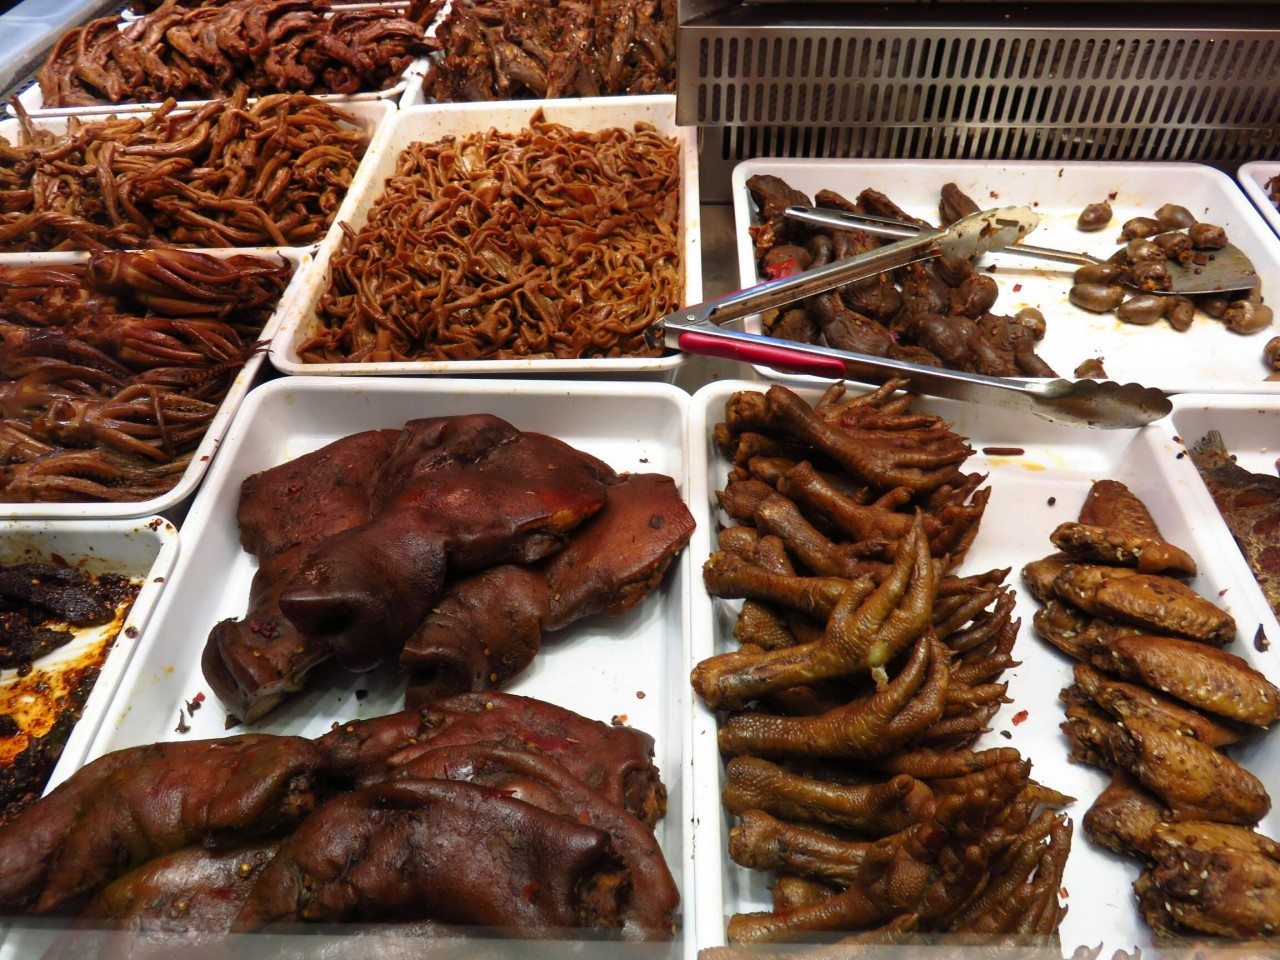 some food in China - chicken feet and pig face